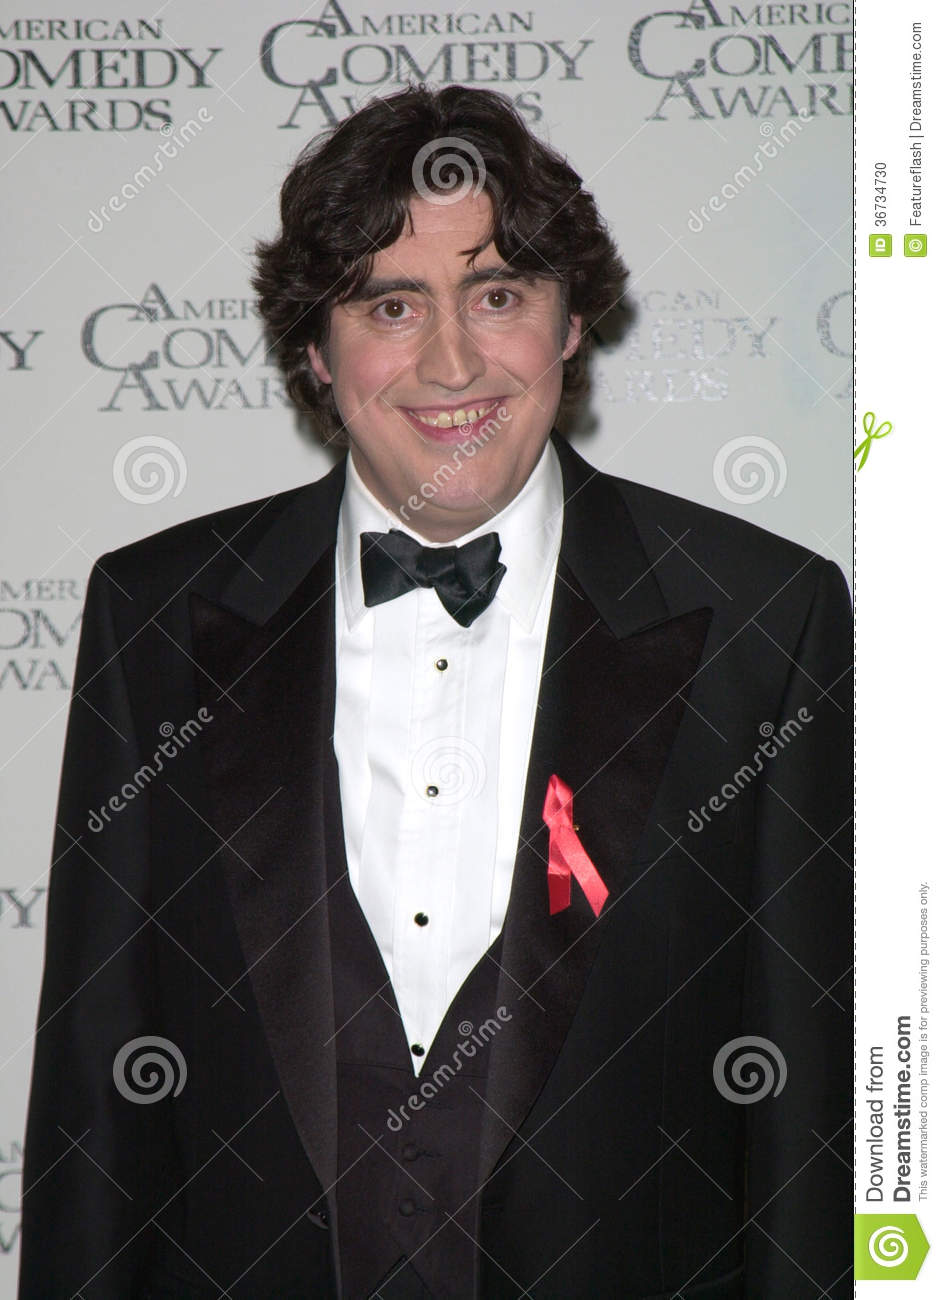 paul-smith-american-comedy-actor-images